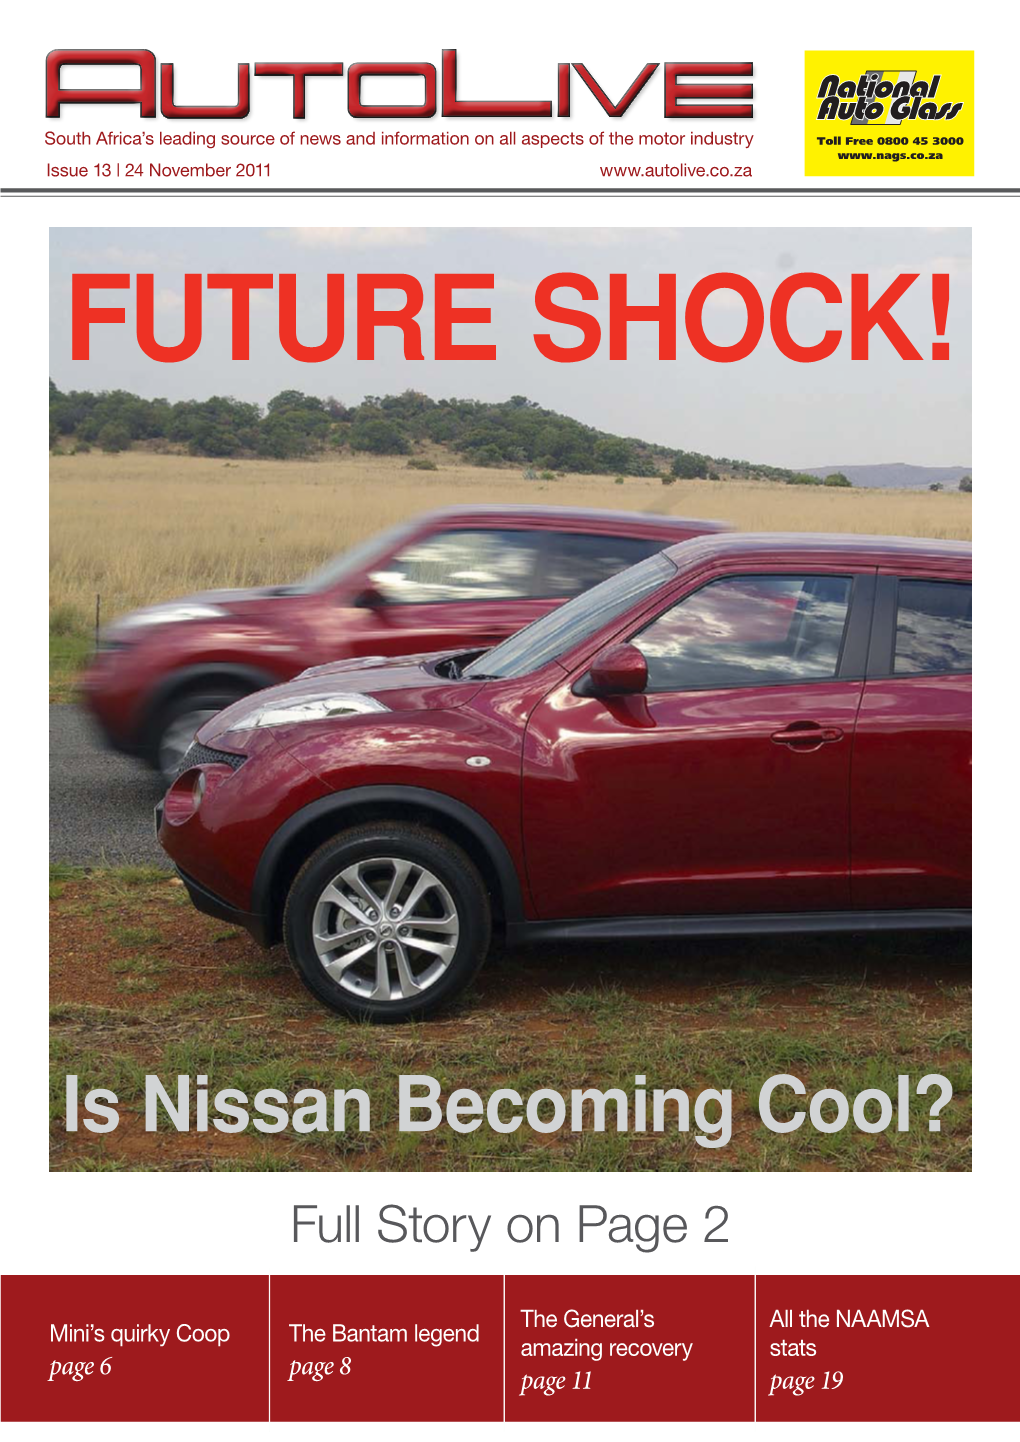 Is Nissan Becoming Cool?